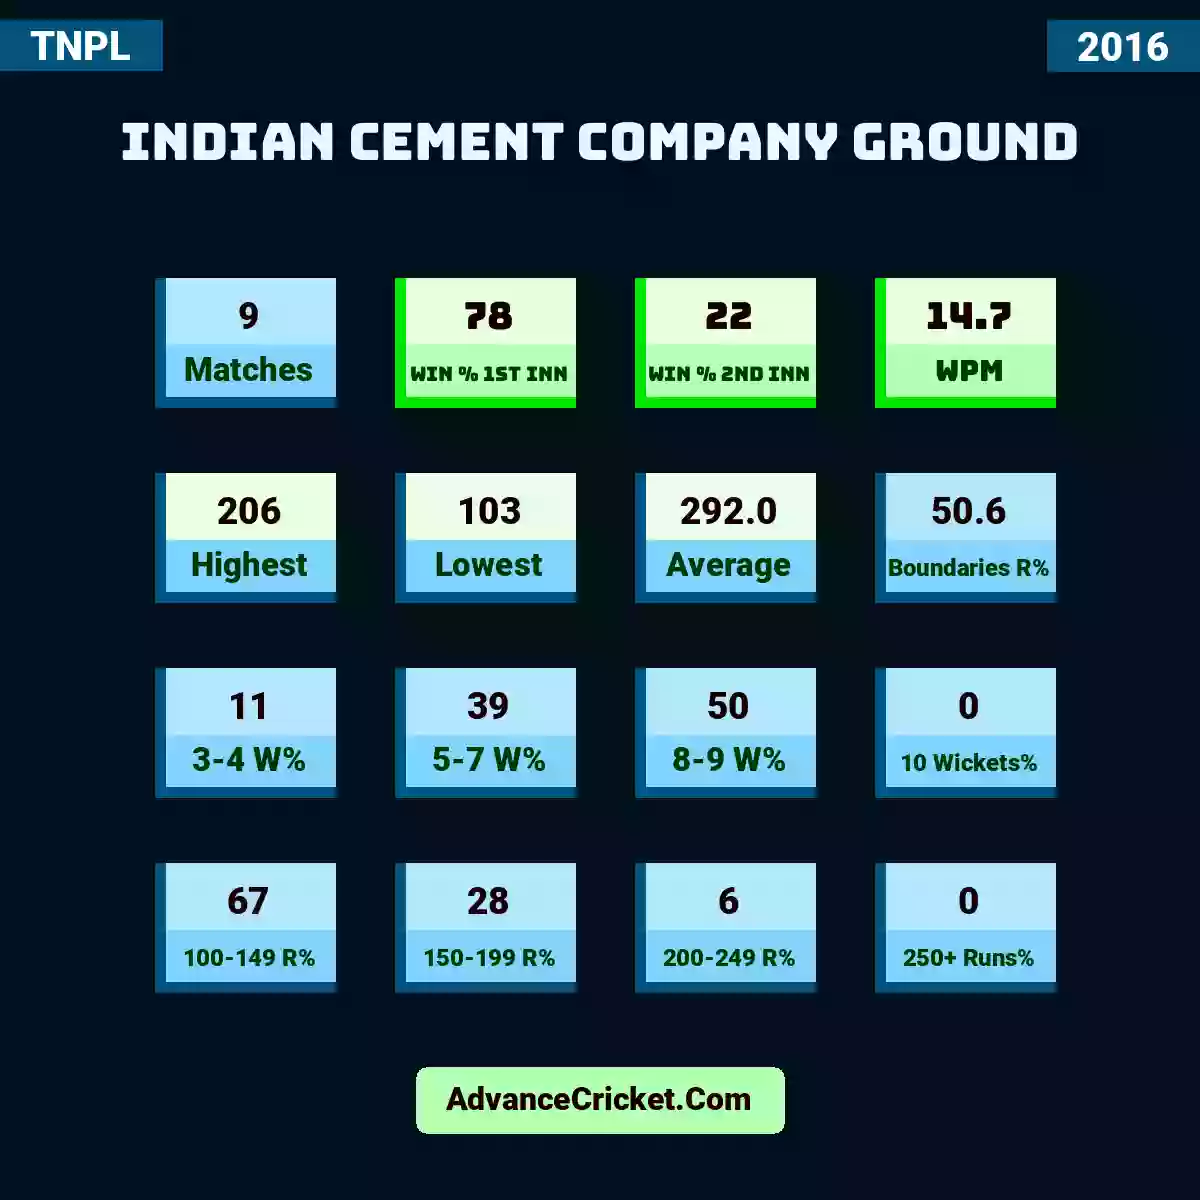 Image showing Indian Cement Company Ground with Matches: 9, Win % 1st Inn: 78, Win % 2nd Inn: 22, WPM: 14.7, Highest: 206, Lowest: 103, Average: 292.0, Boundaries R%: 50.6, 3-4 W%: 11, 5-7 W%: 39, 8-9 W%: 50, 10 Wickets%: 0, 100-149 R%: 67, 150-199 R%: 28, 200-249 R%: 6, 250+ Runs%: 0.